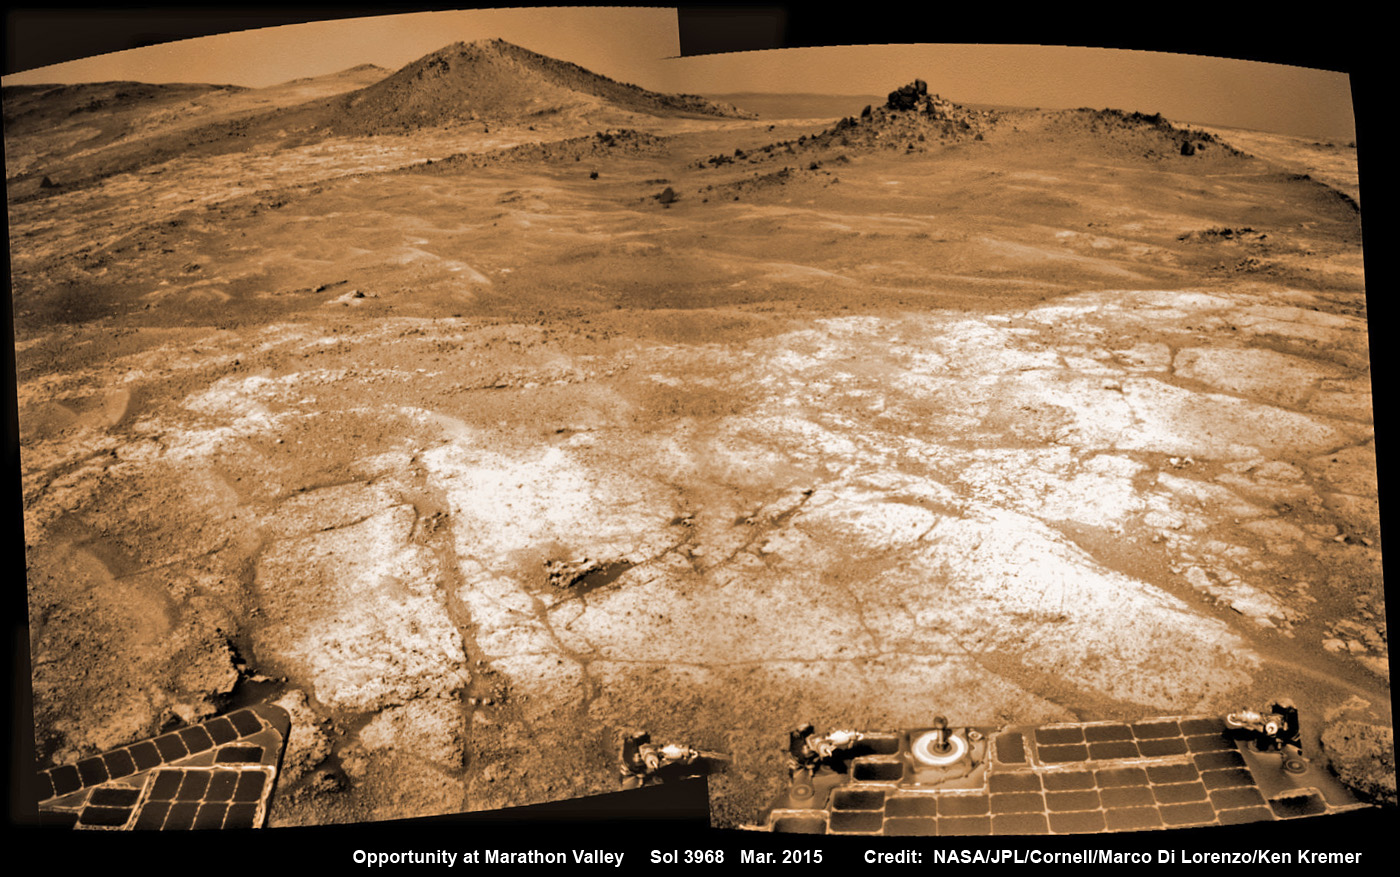 Opportunity’s view on the day the NASA rover exceeded the distance of a marathon on the surface of Mars on March 24, 2015, Sol 3968. Rover stands at Spirit of Saint Louis crater near mountaintop at Marathon Valley overlook and Martian cliffs at Endeavour crater holding deposits of water altered clay minerals.  This navcam camera photo mosaic was assembled from images taken on Sol 3968 (March 24, 2015) and colorized.  Credit: NASA/JPL/Cornell/Marco Di Lorenzo/Ken Kremer/kenkremer.com